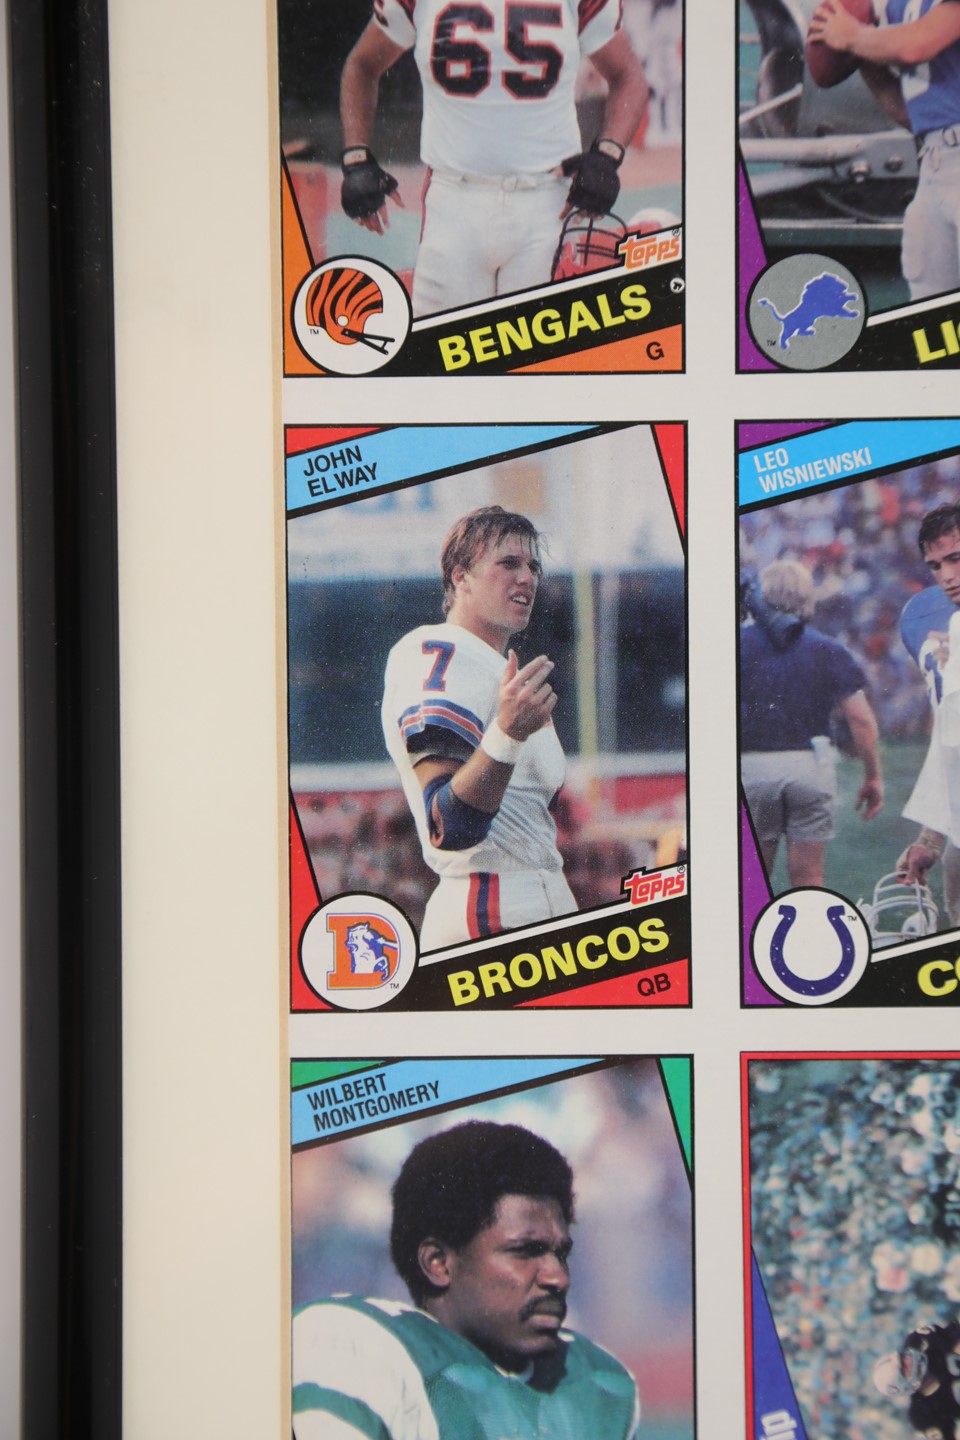 Football Cards - 1984 Topps Football Uncut Sheet with Marino and Elway Rookies